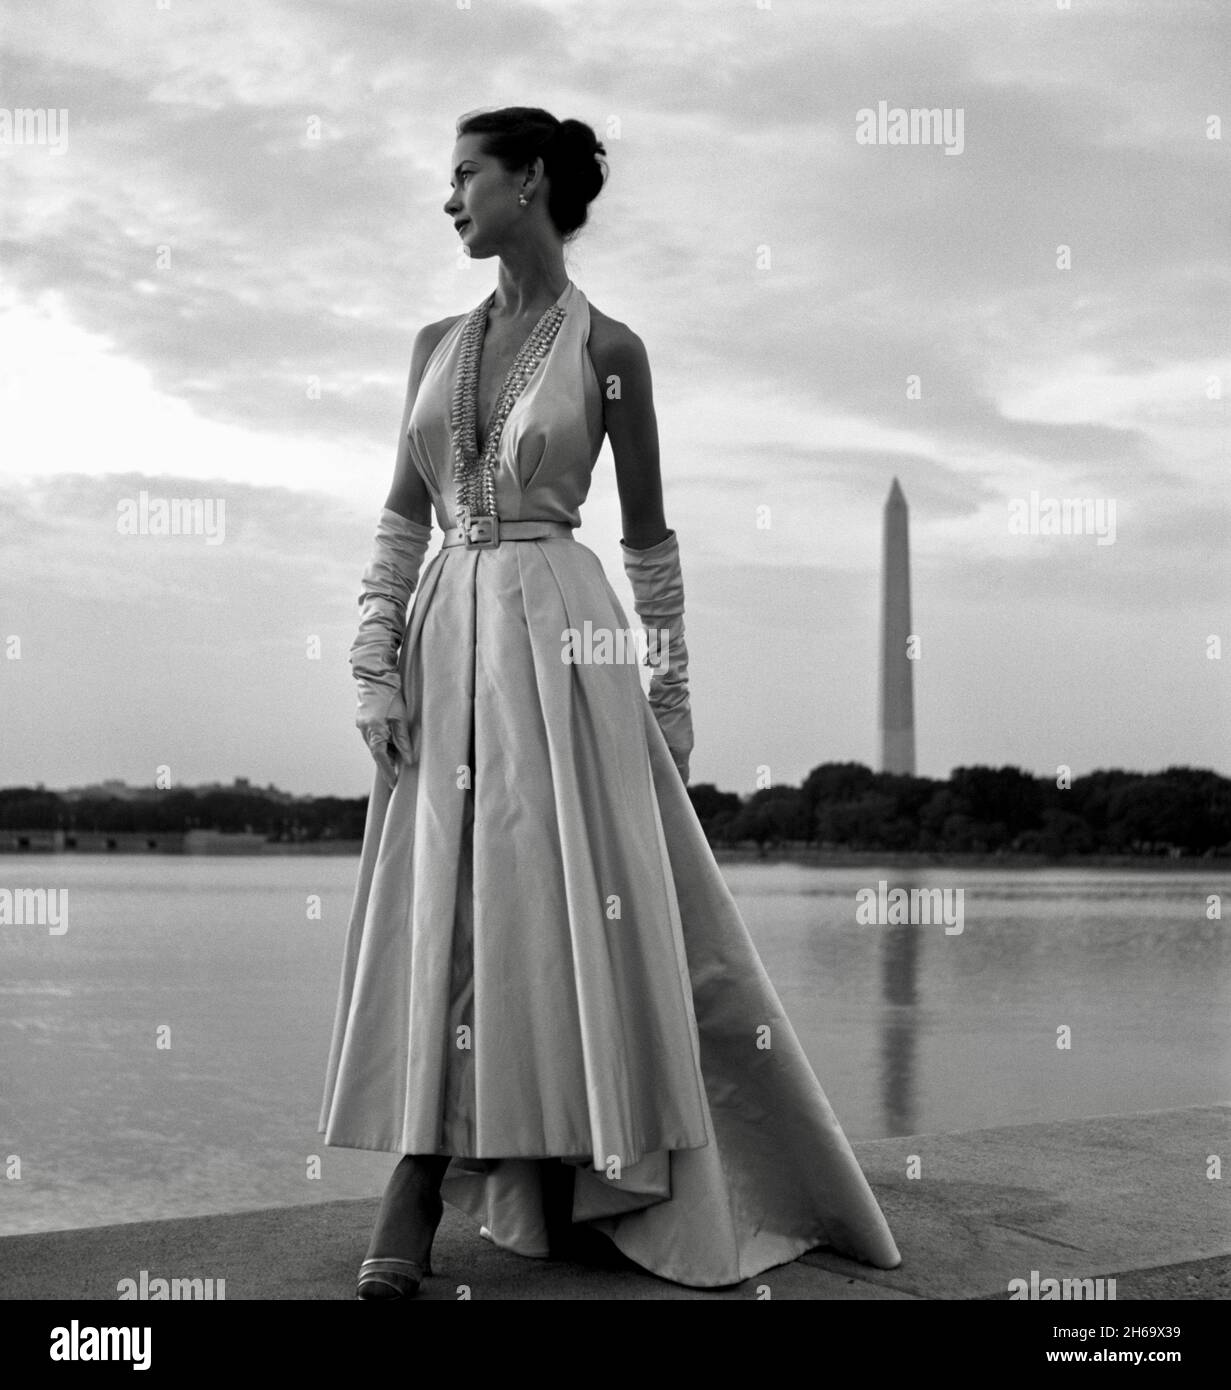 Toni Frissell - Fashion Model on the steps of the Jefferson Memorial with Tidal Basin and Washington Monument in the background - Washington DC USA Stock Photo